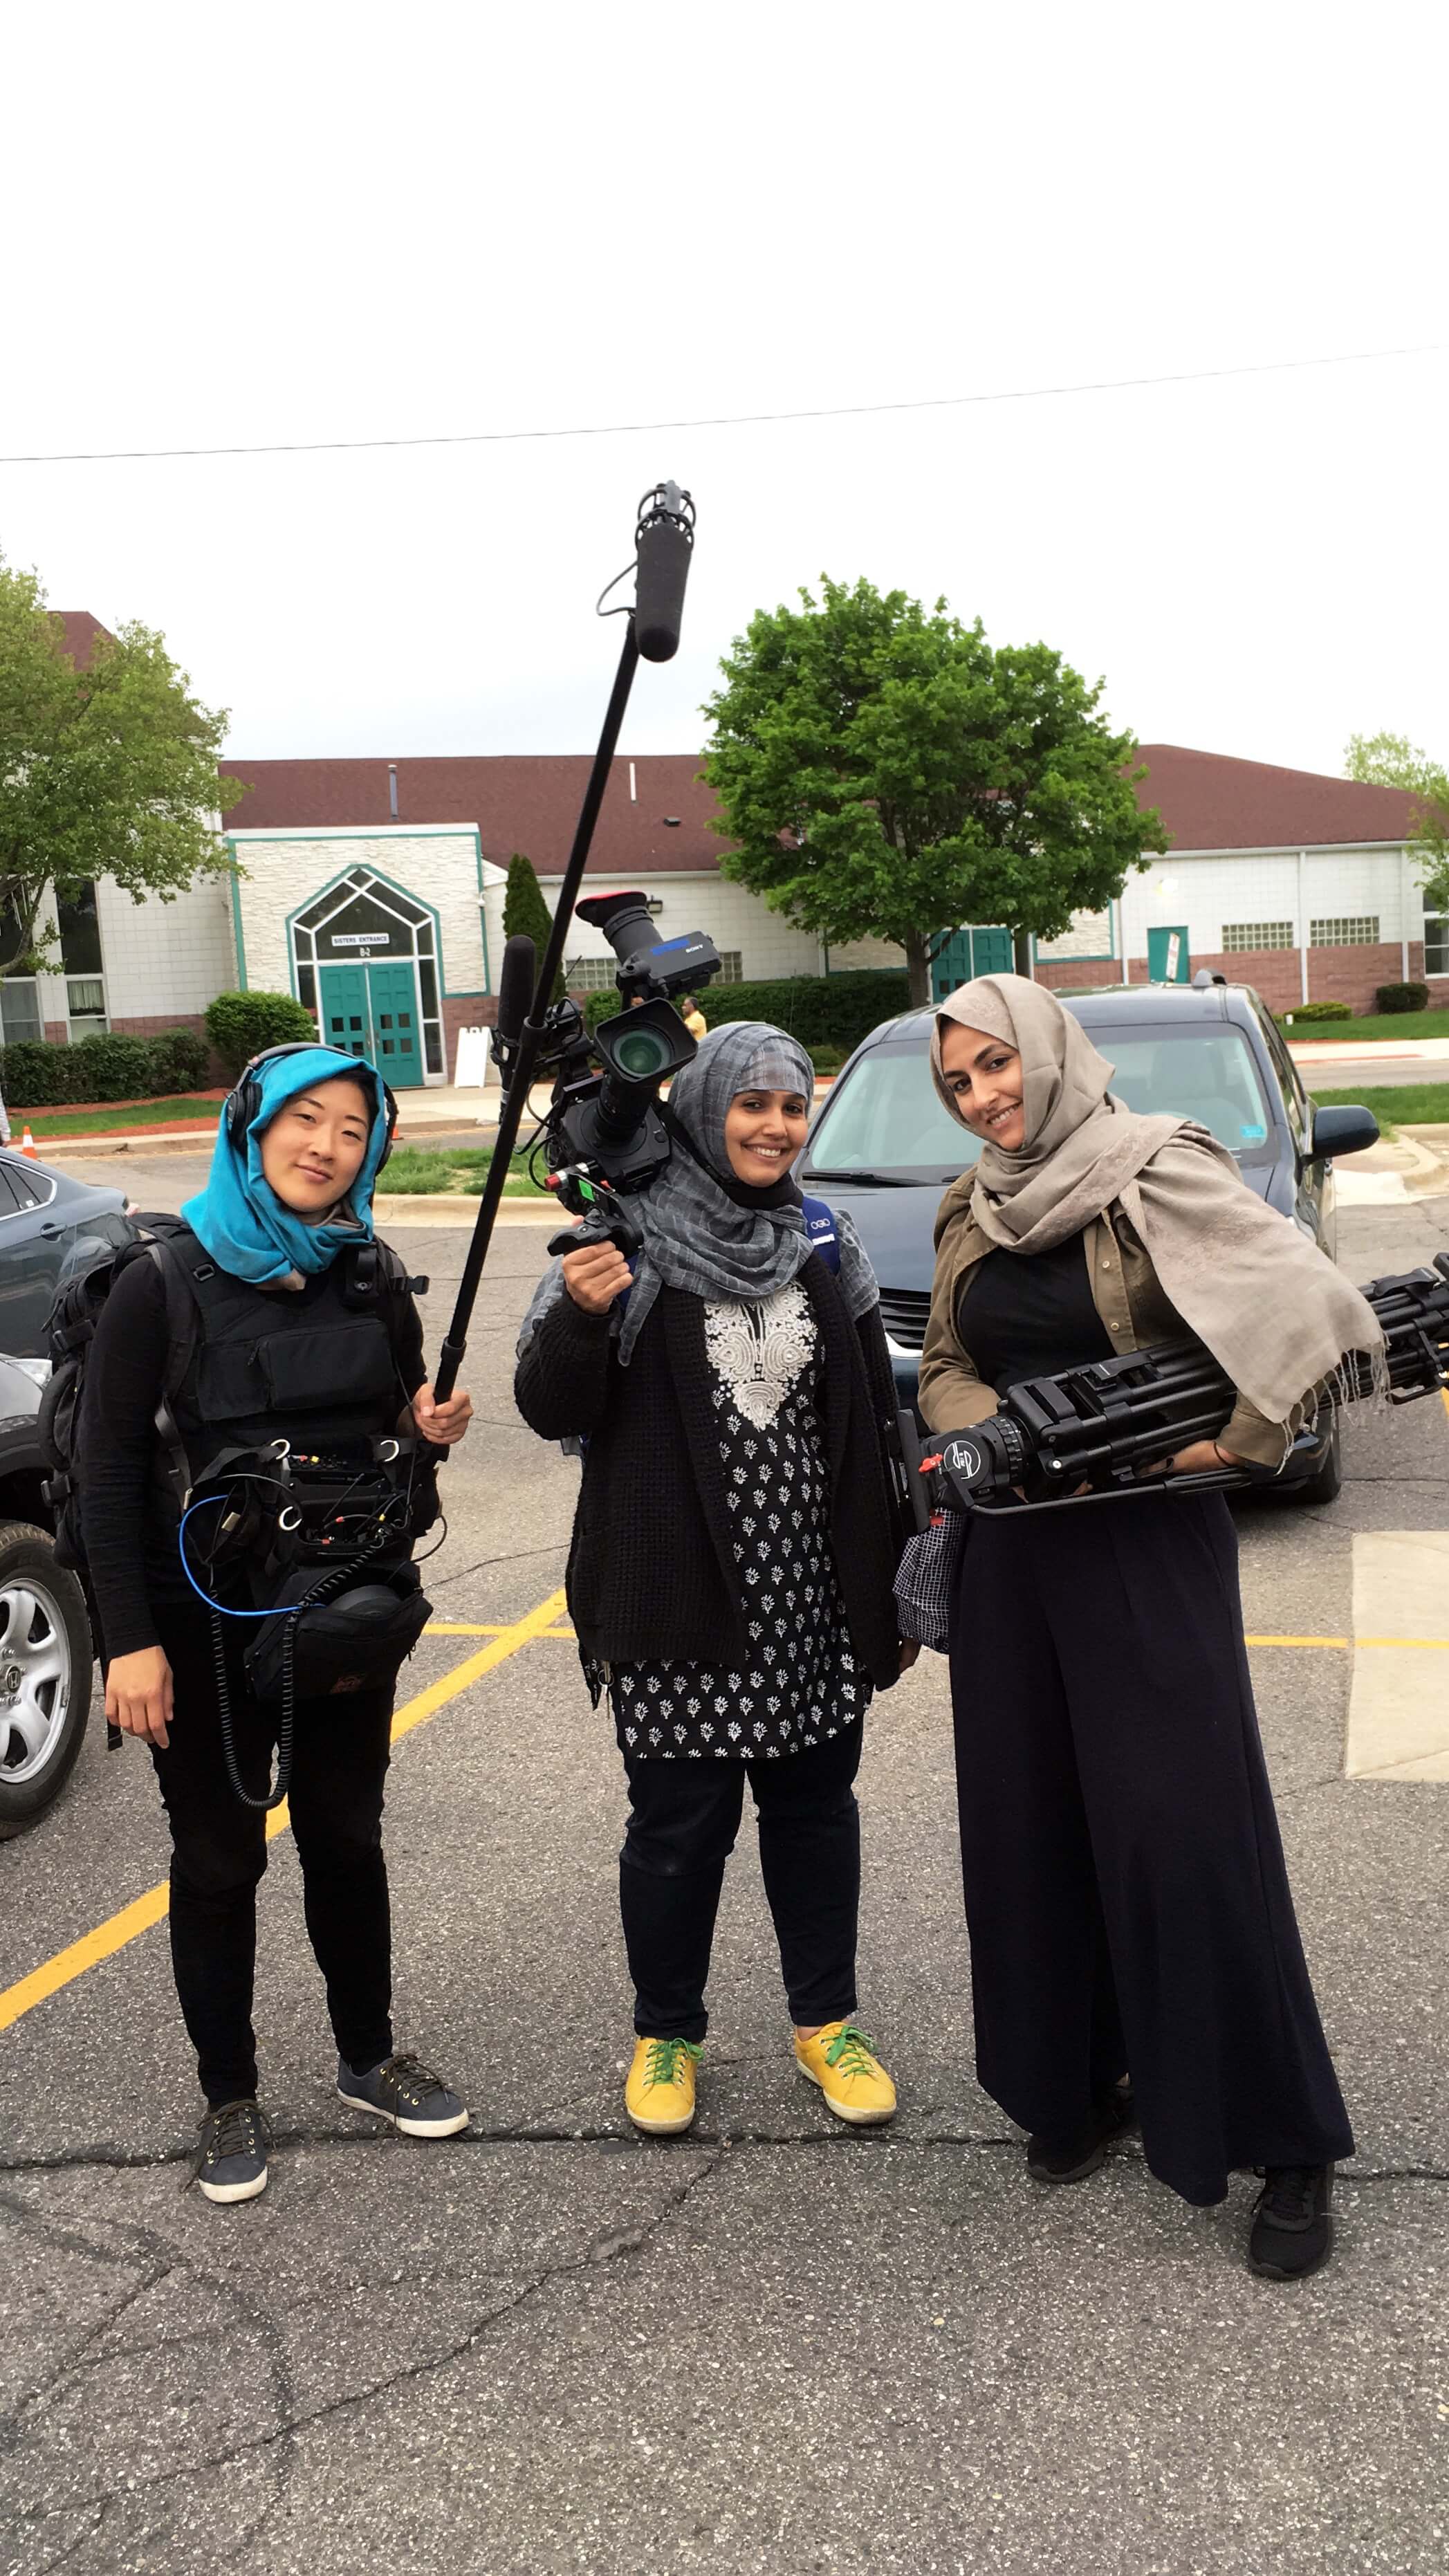 Production still of An Act of Worship. Three women crew members are standing in a parking lot, wearing hijabs, and holding film equipment.